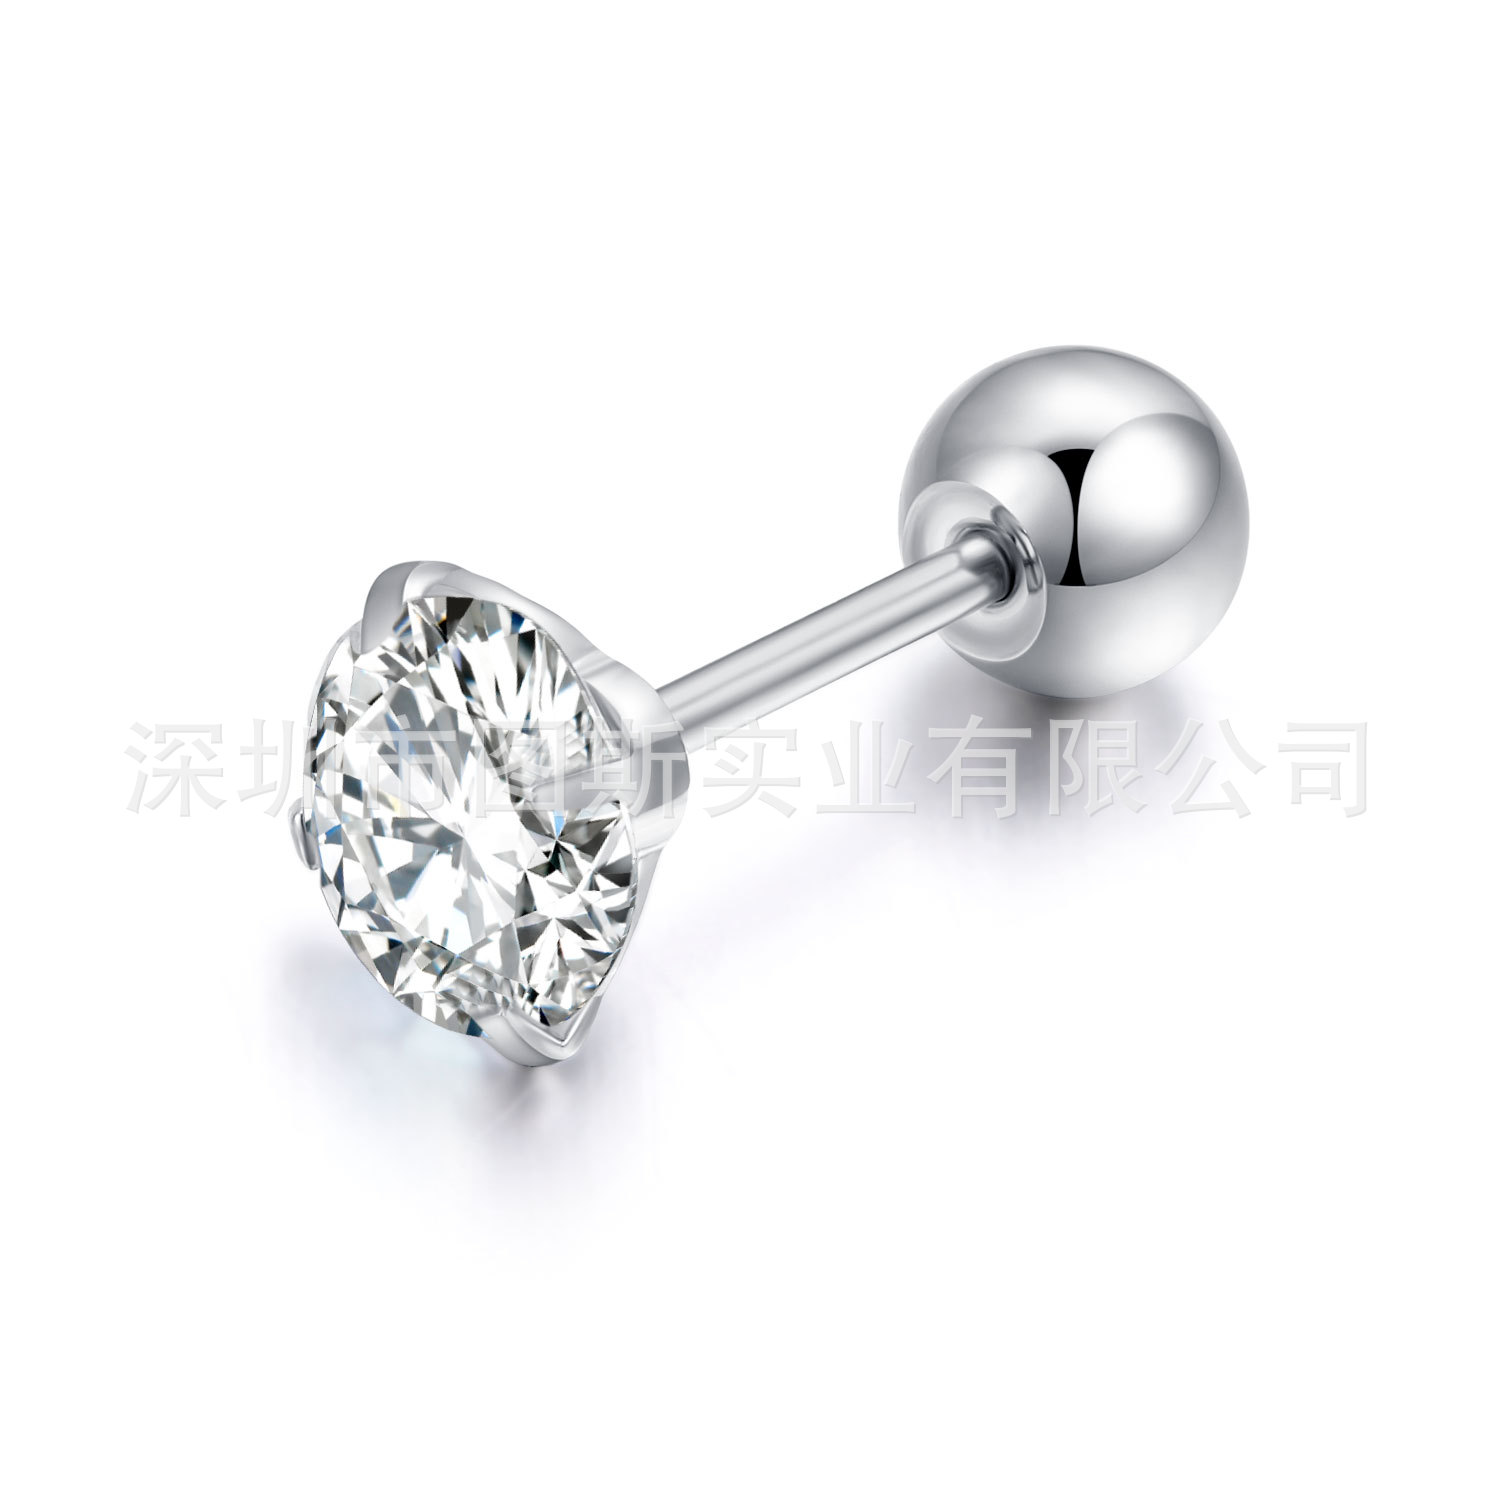 Exclusive for Cross-Border Round 3A Zircon Stud Earrings Titanium Steel round Studs Stainless Steel Vacuum Plating Color Earrings